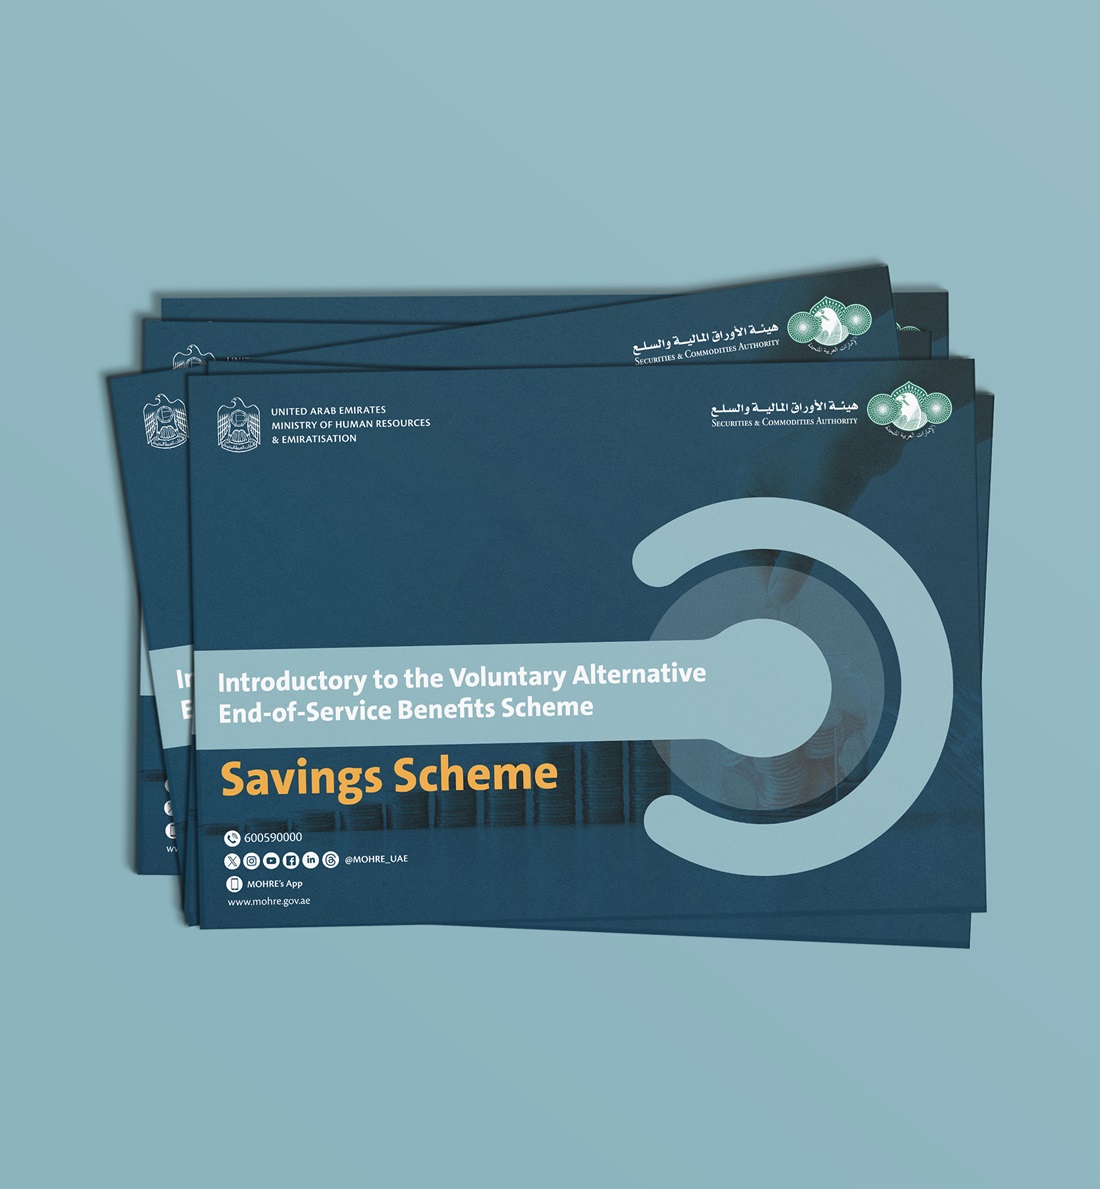 Introductory to the Optional Alternative End-of-Service Benefits Scheme (Savings Scheme)